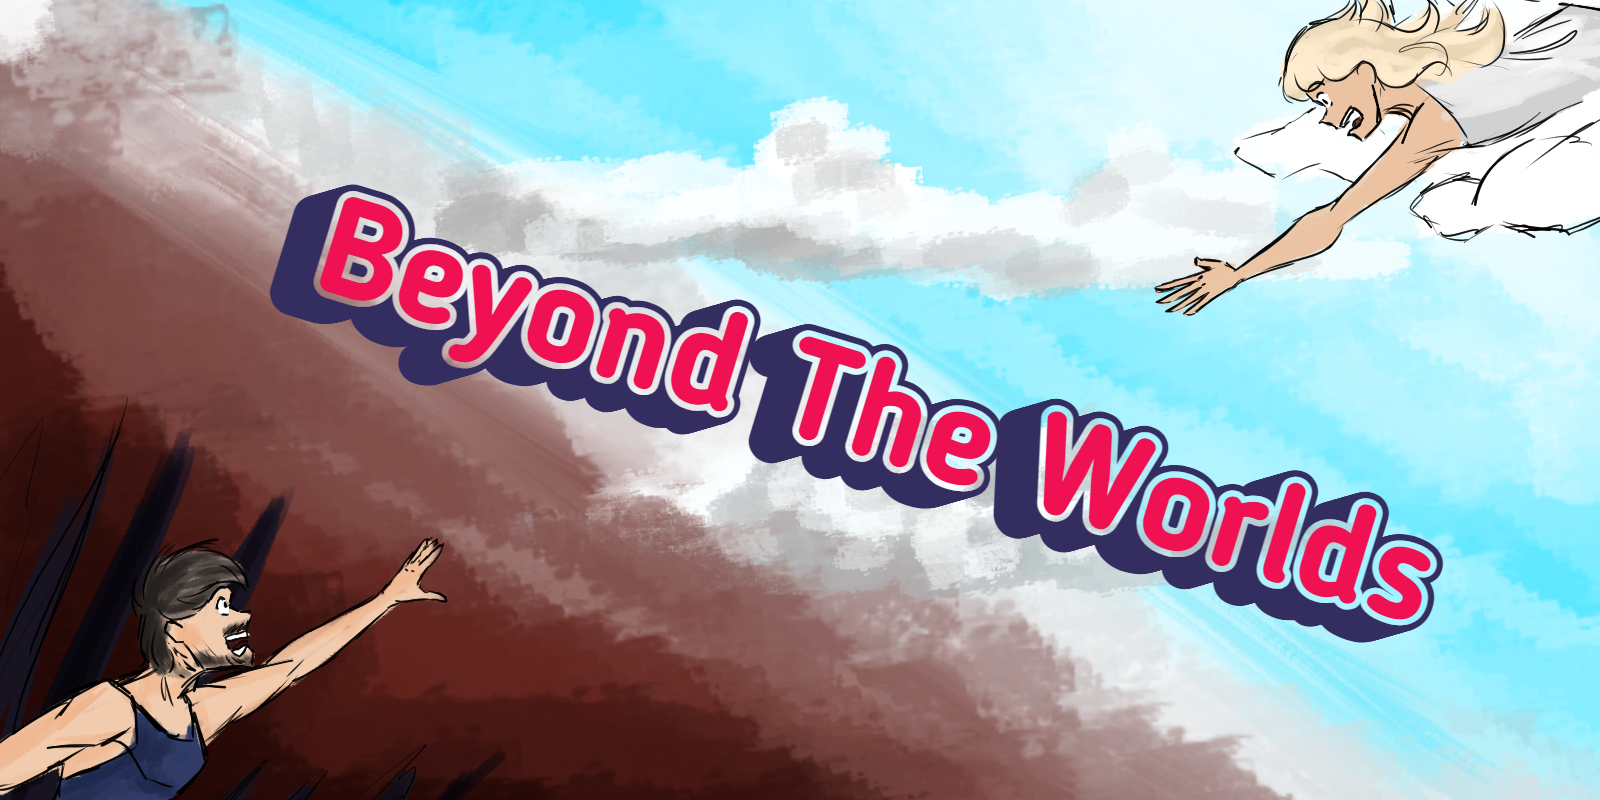 beyond the worlds